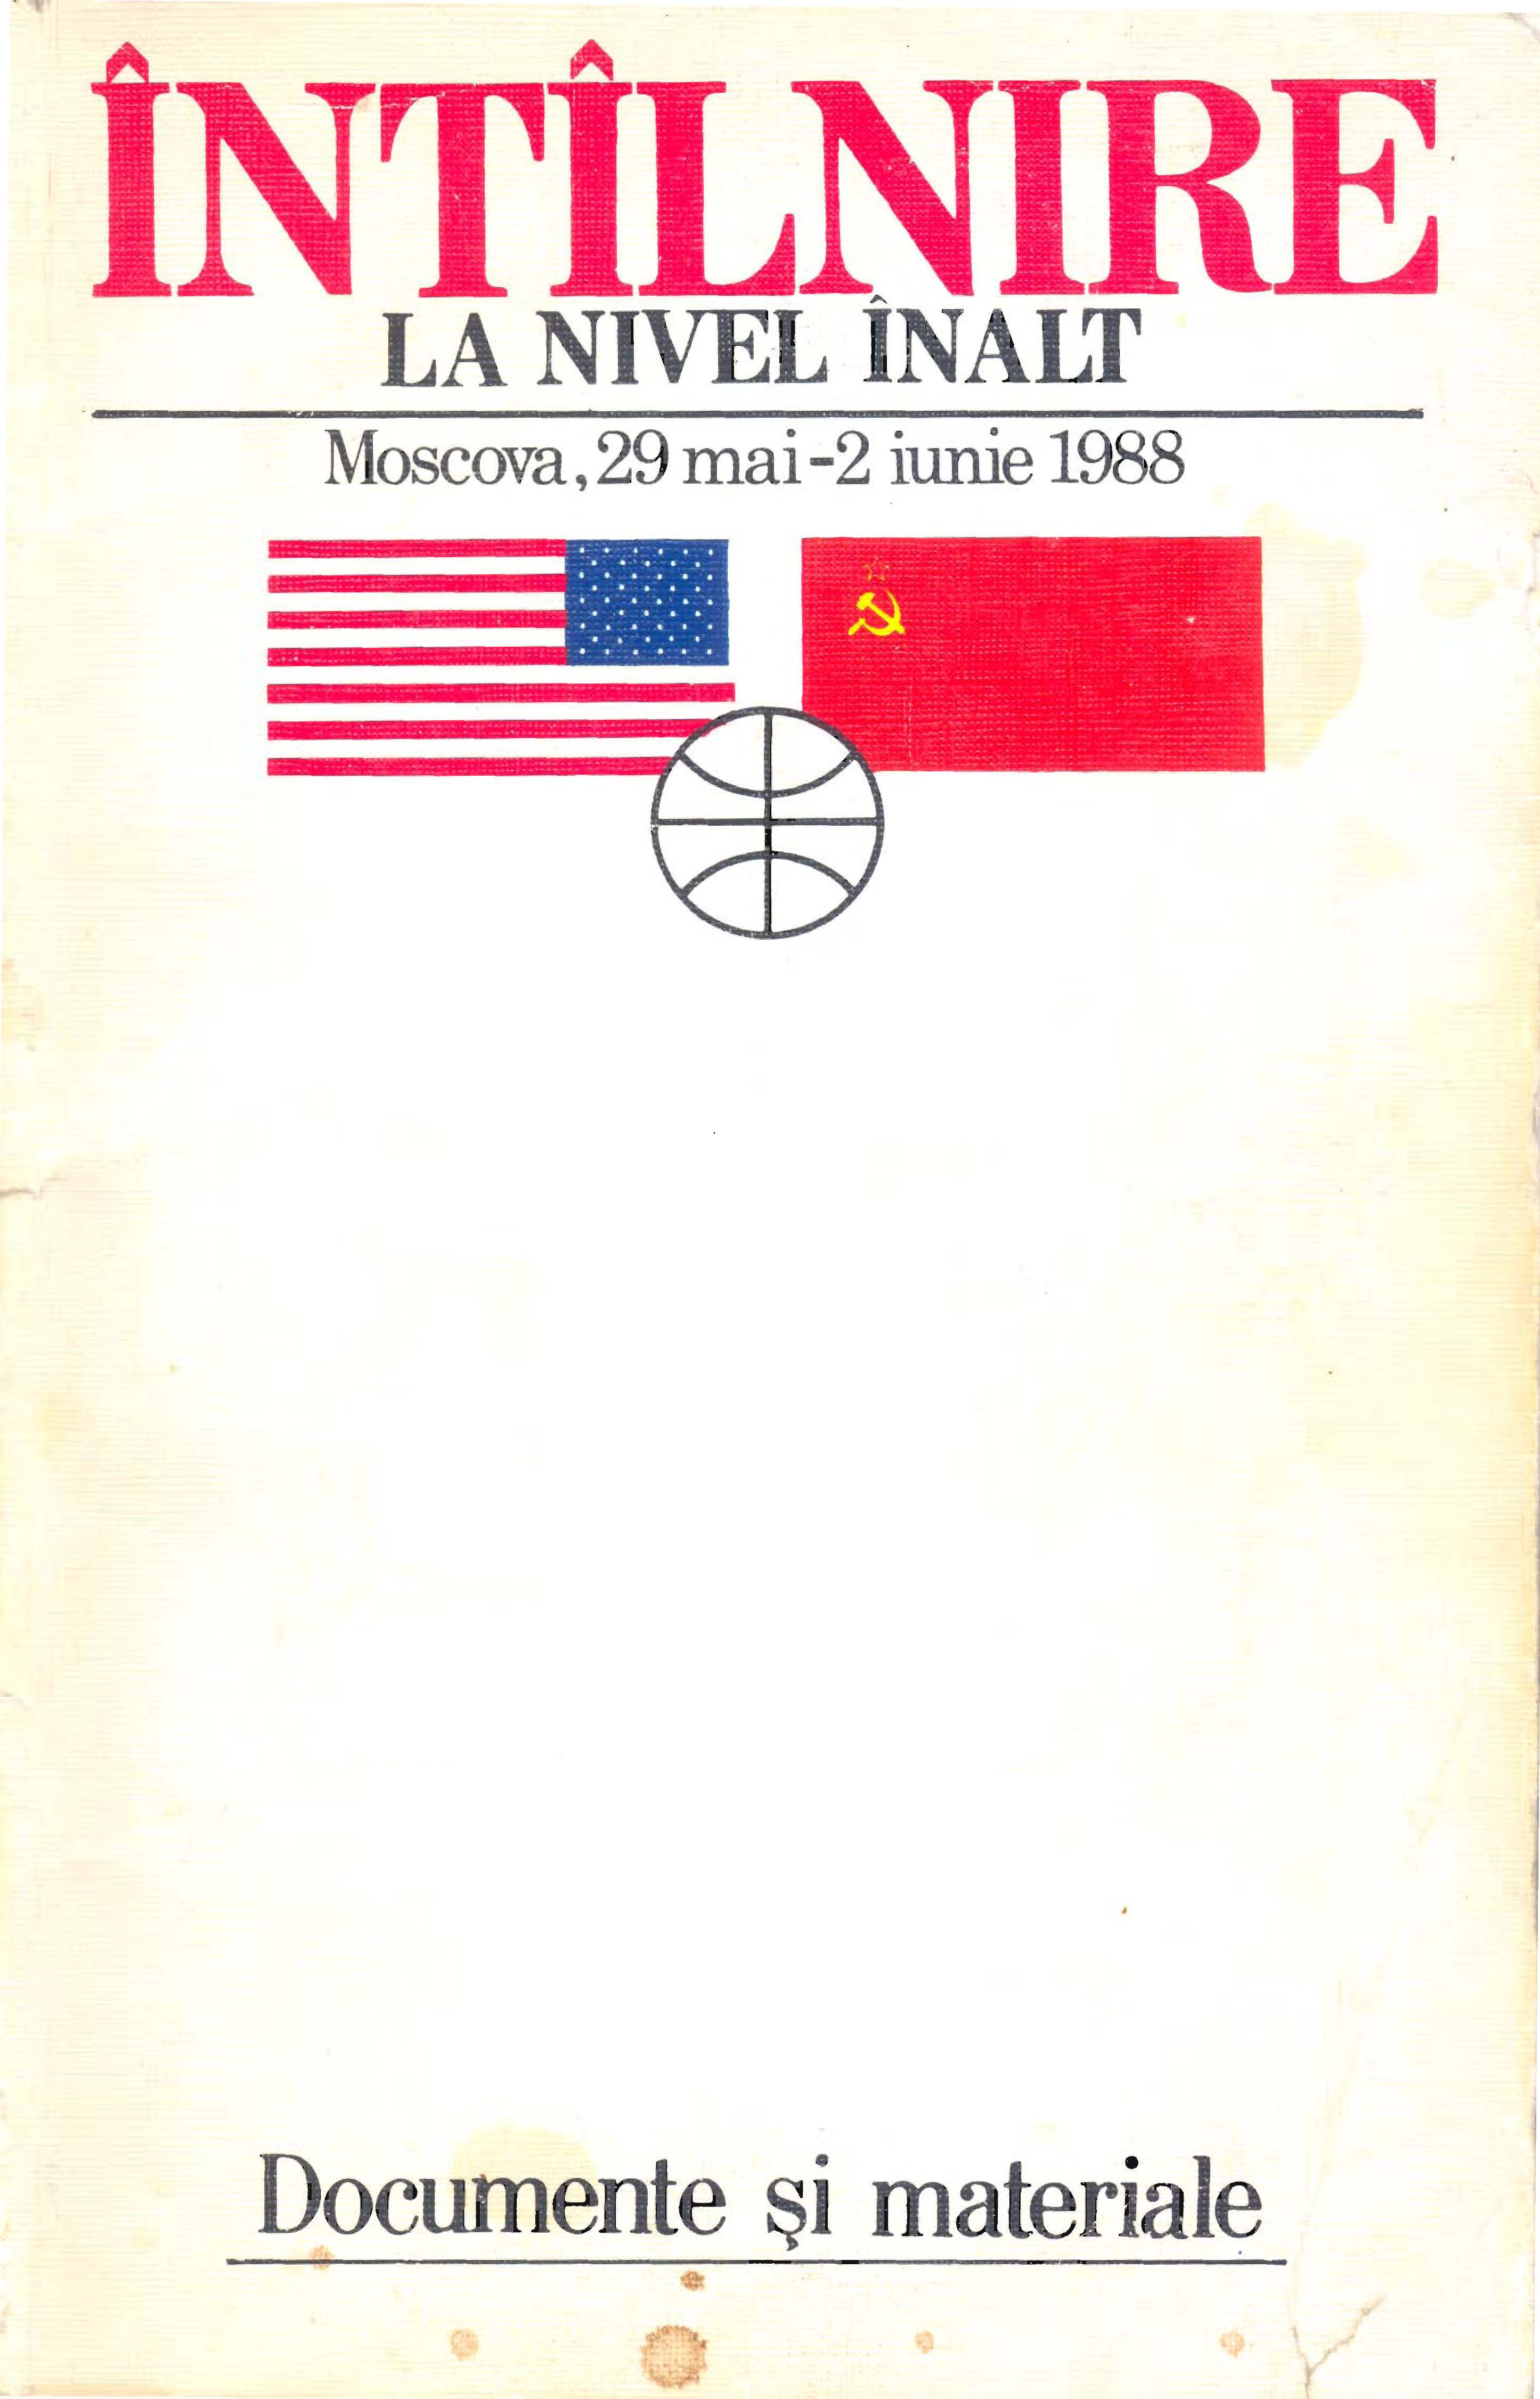 Front cover of the booklet about the Gorbachev - Reagan meeting in Moscow, May- June 1988